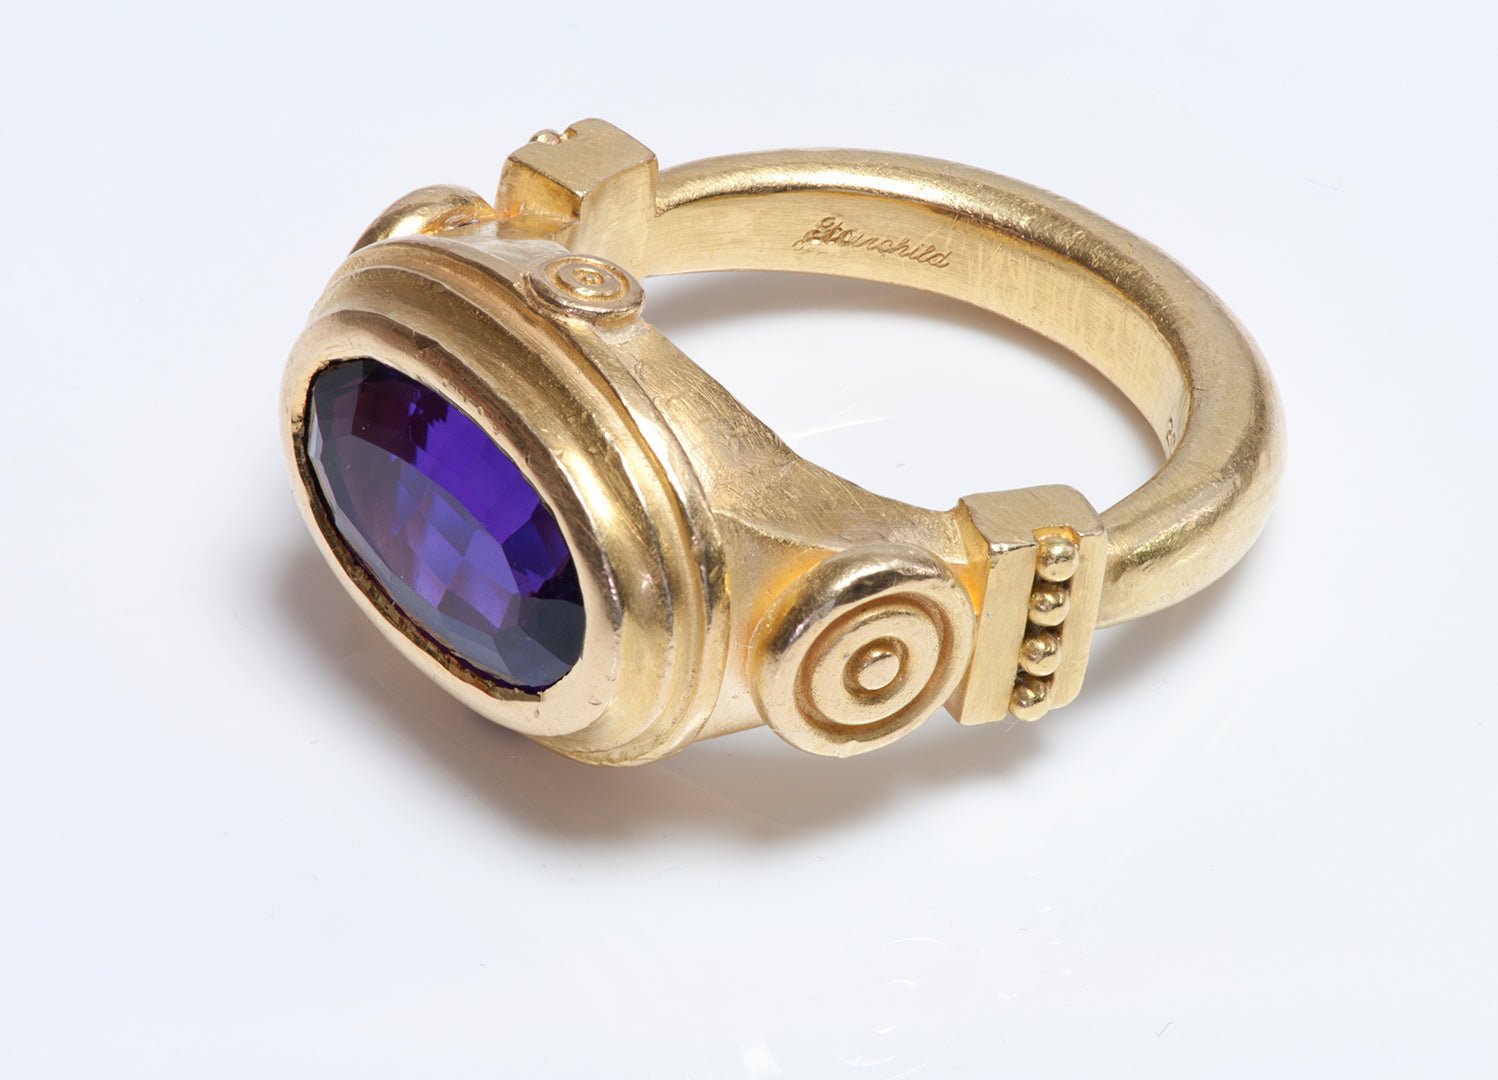 Fairchild & Co. 20K Yellow Gold Amethyst Ring - DSF Antique Jewelry